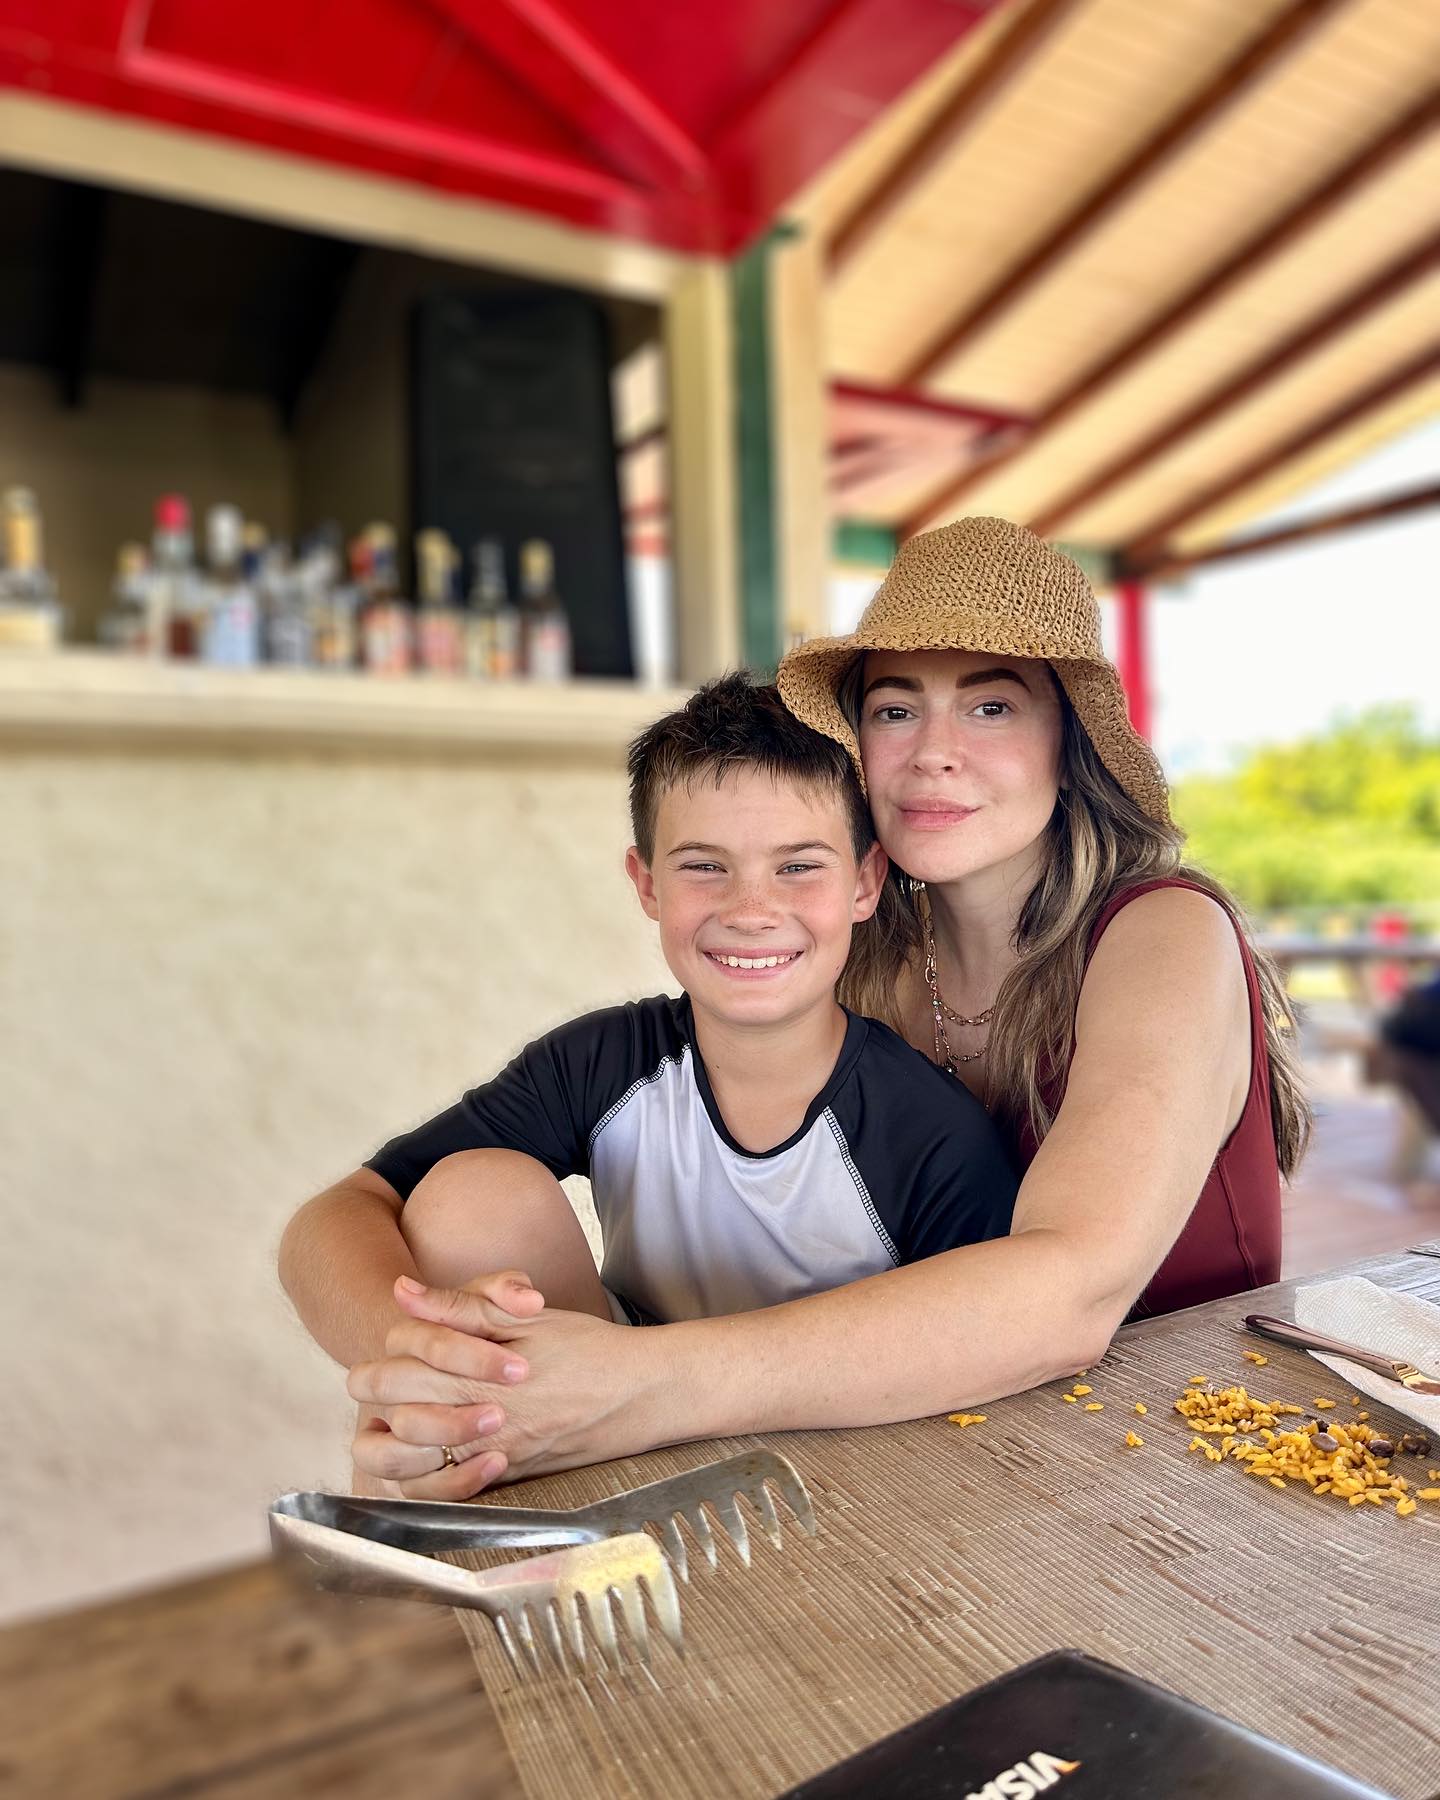 The star was accepting cash only for autographs and selfies following the backlash she got from creating a GoFundMe for her son's sports team